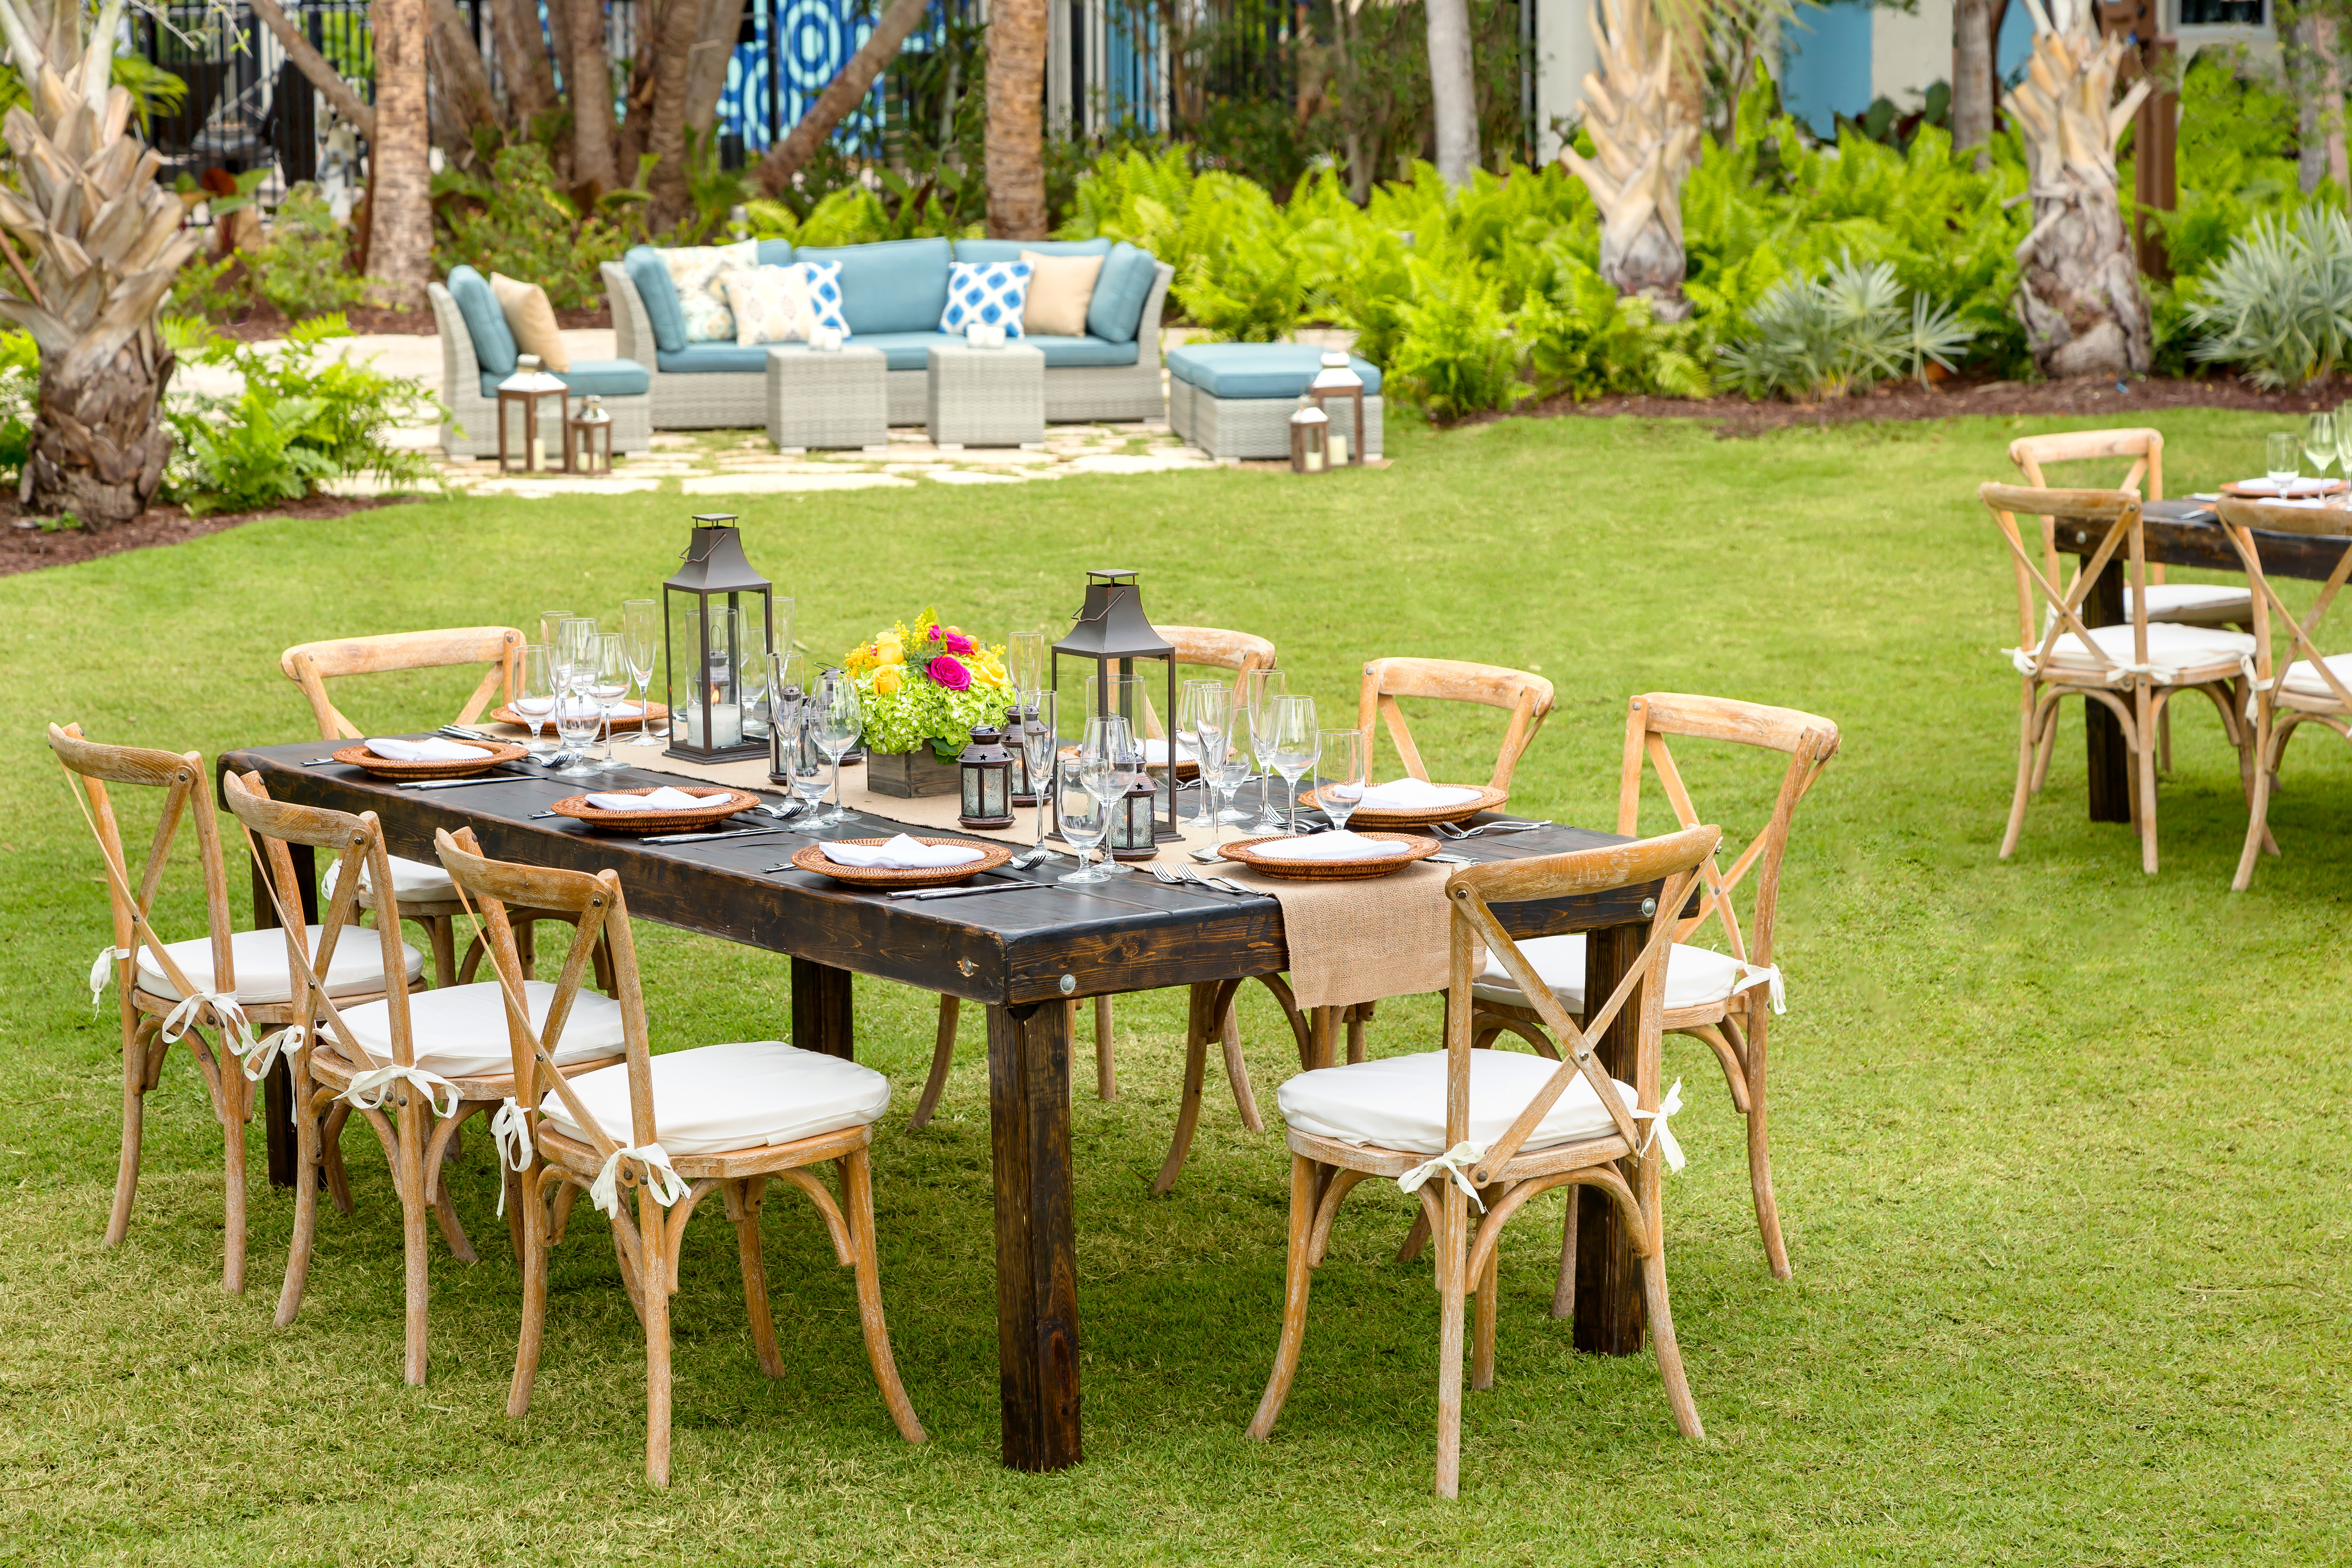 Hotel Garden Area with Dining Tables, Chairs and Sofa